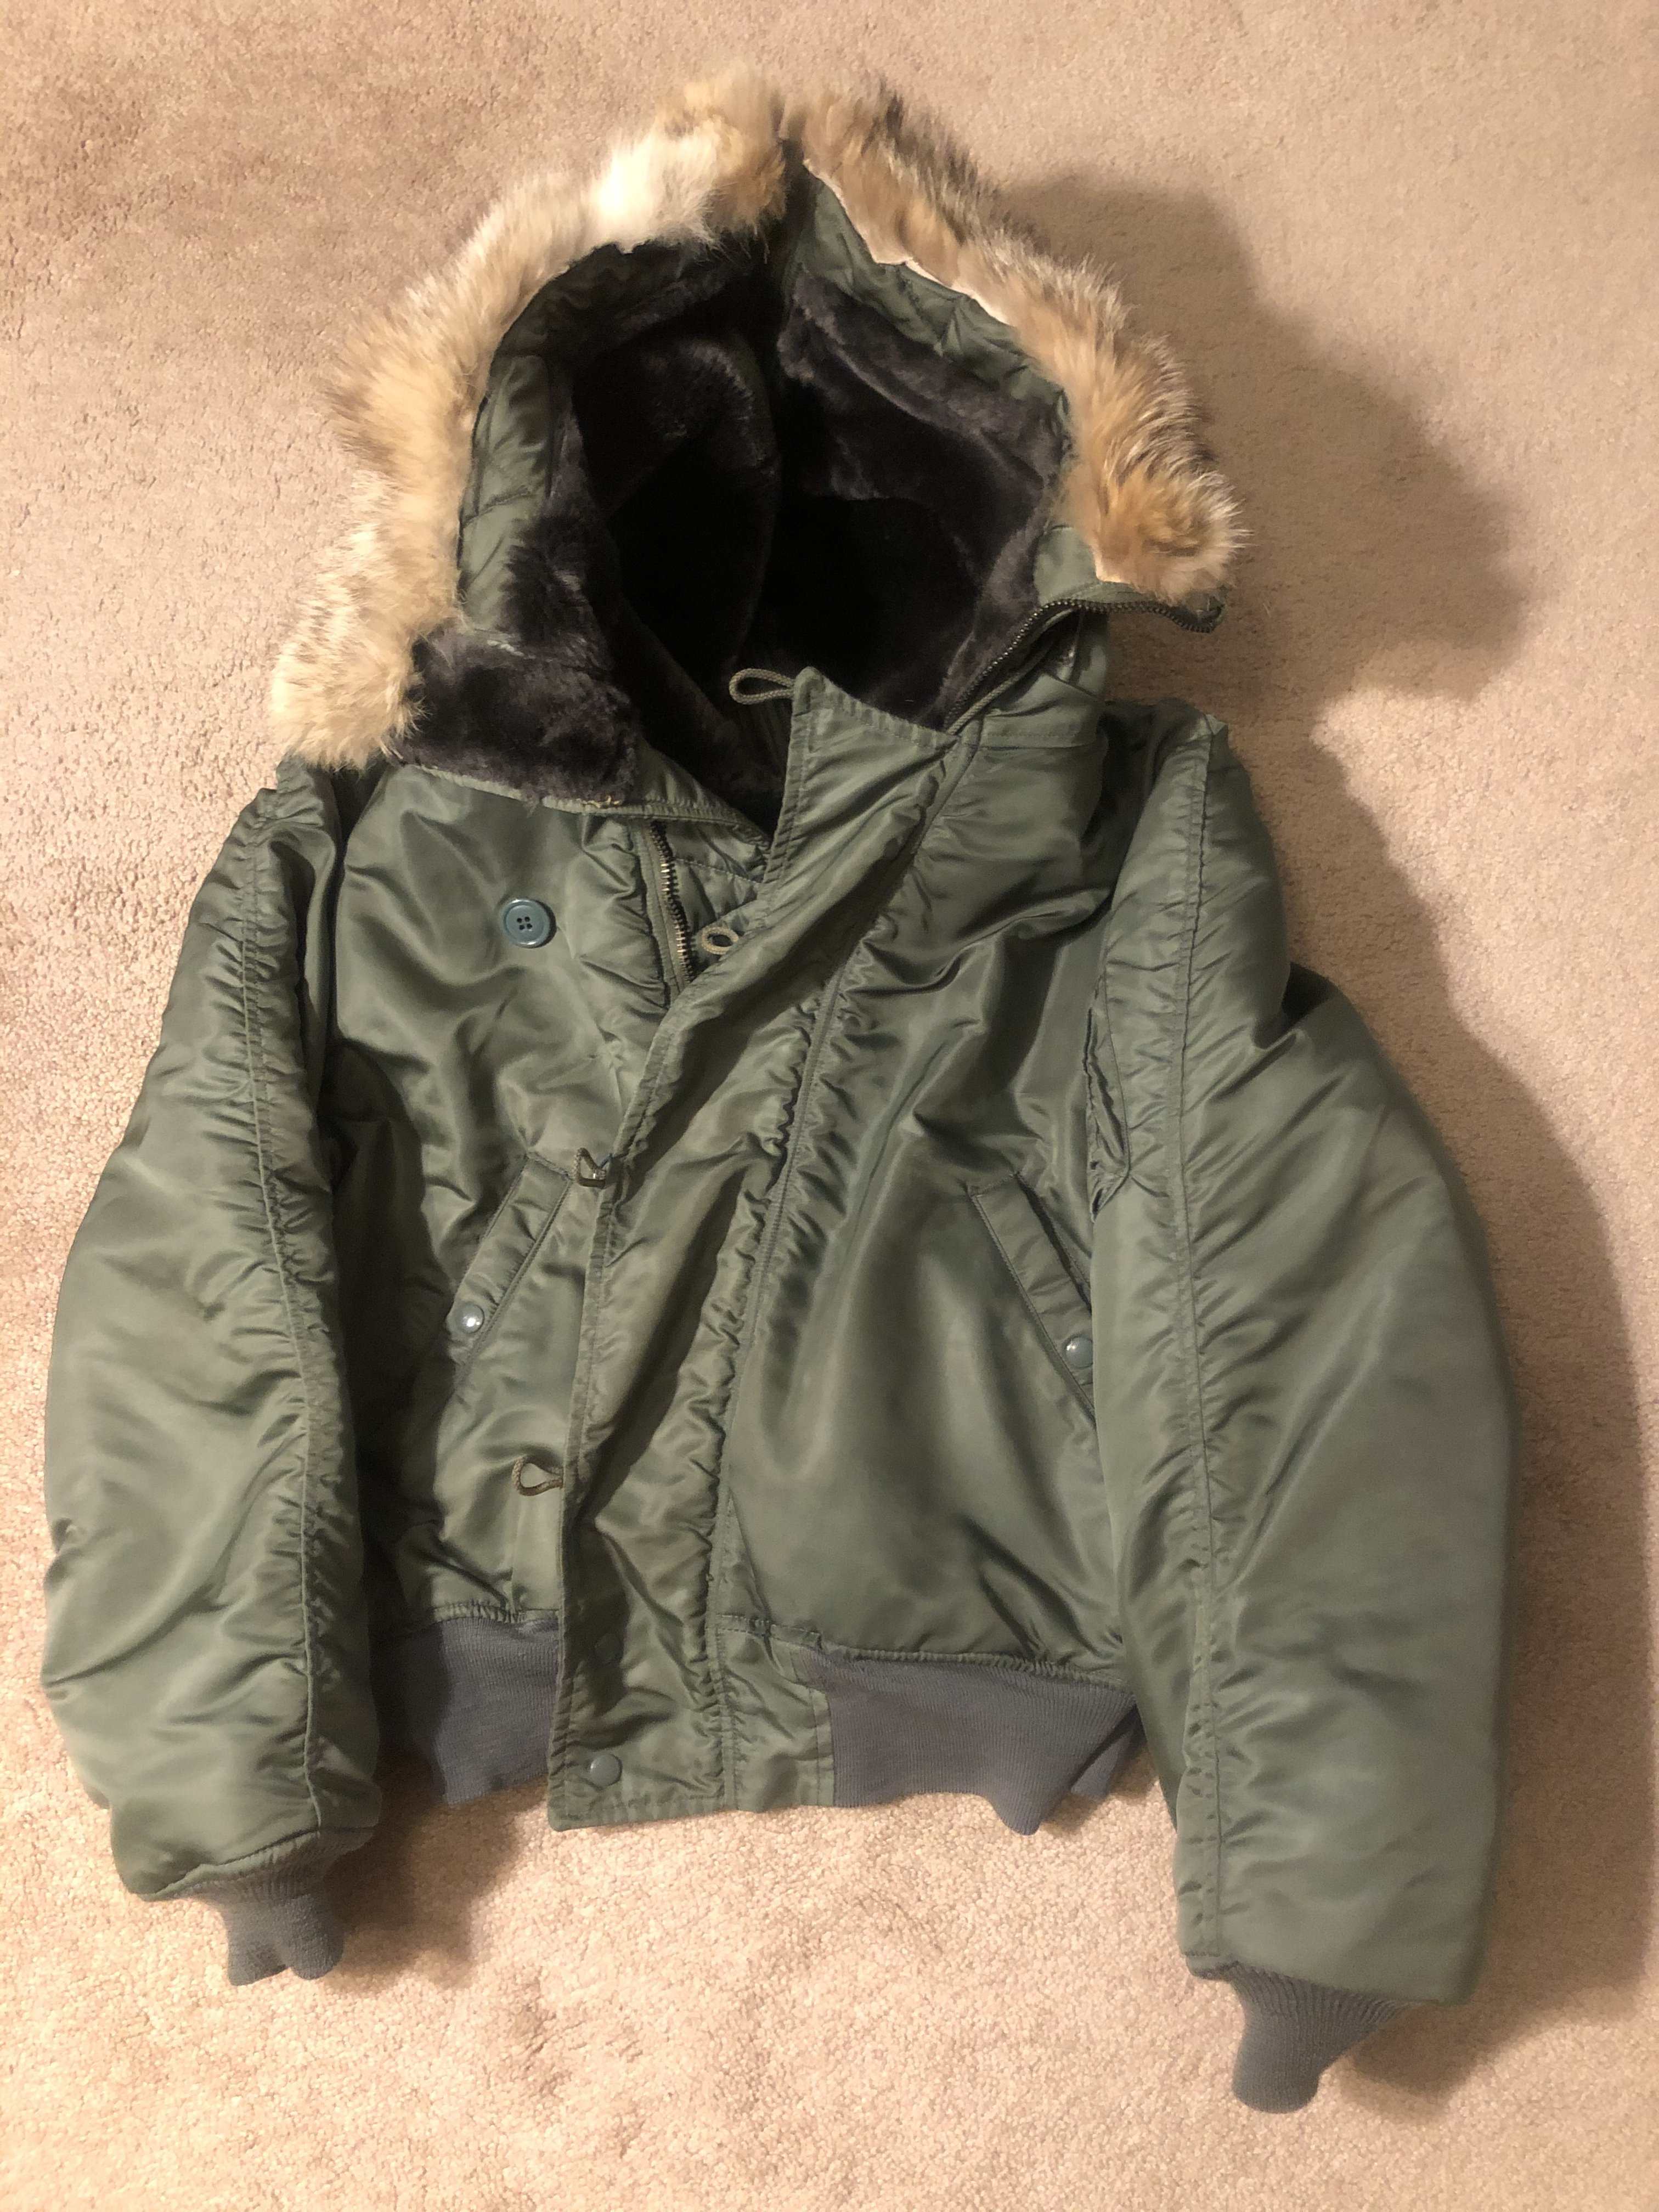 Some question on my n-2b and in general. | Vintage Leather Jackets Forum